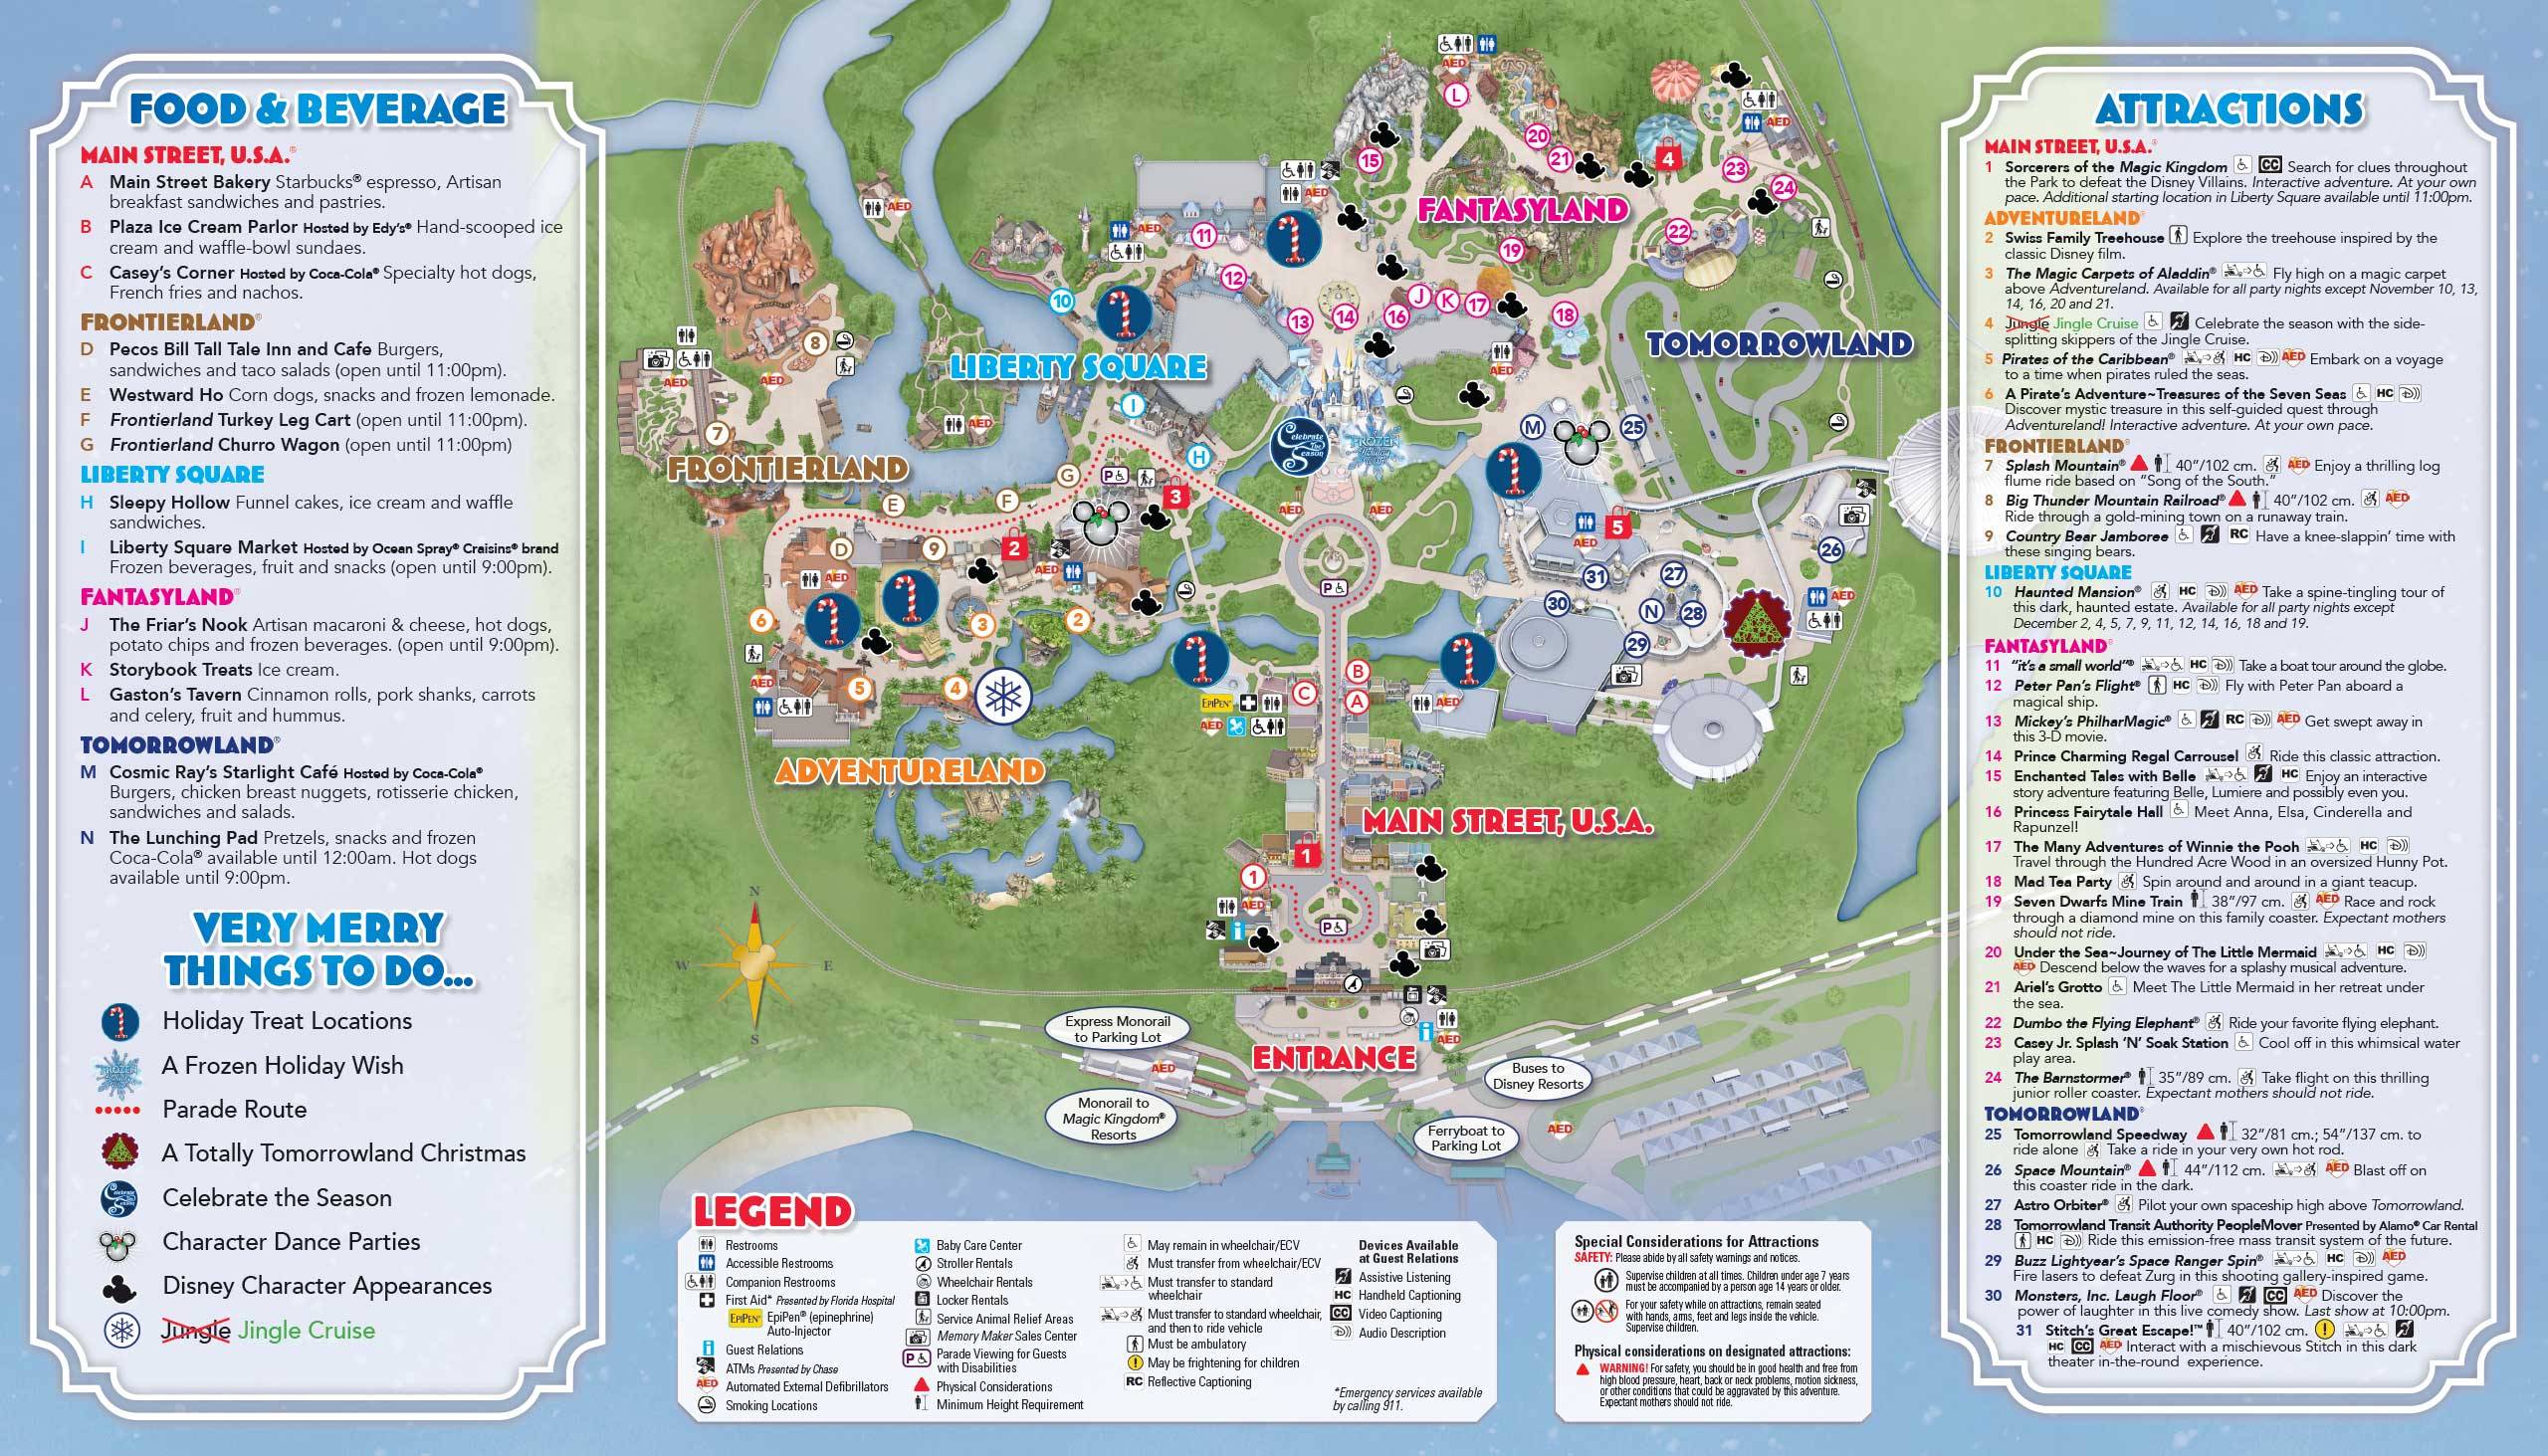 Mickey's Very Merry Christmas Party 2014 guide map - Back